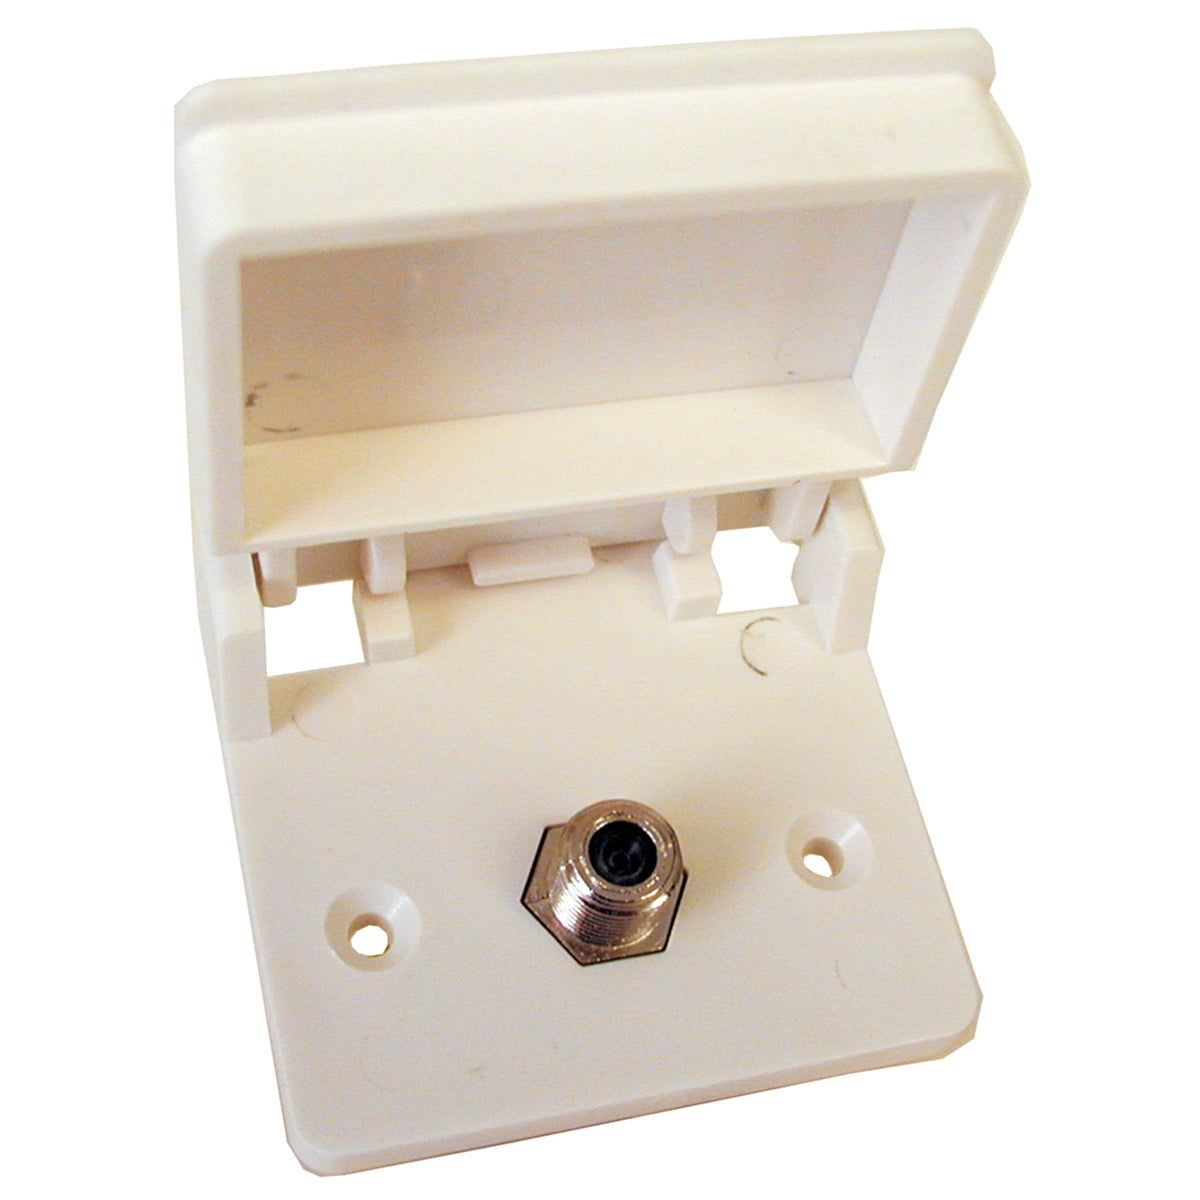 Prime Products 08-6201 Exterior TV Receptacle